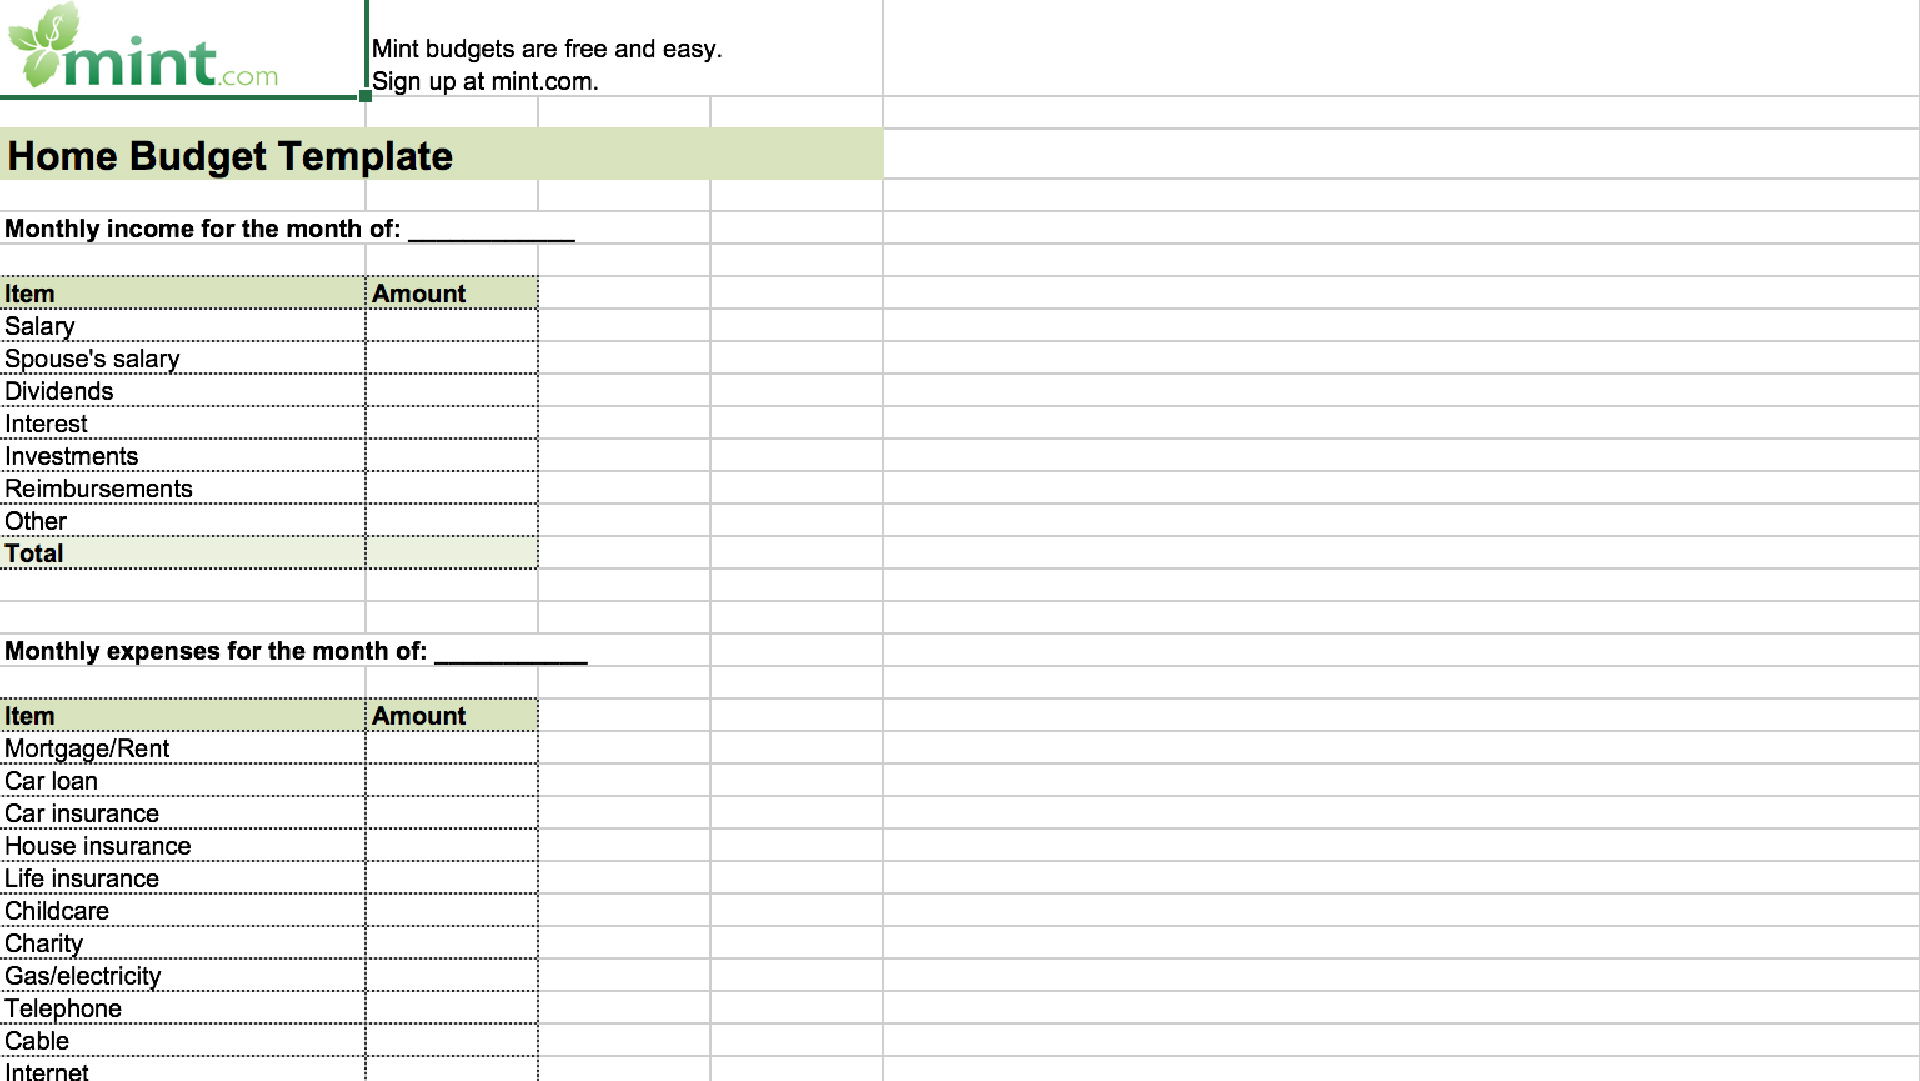 monthly household budget template google sheets